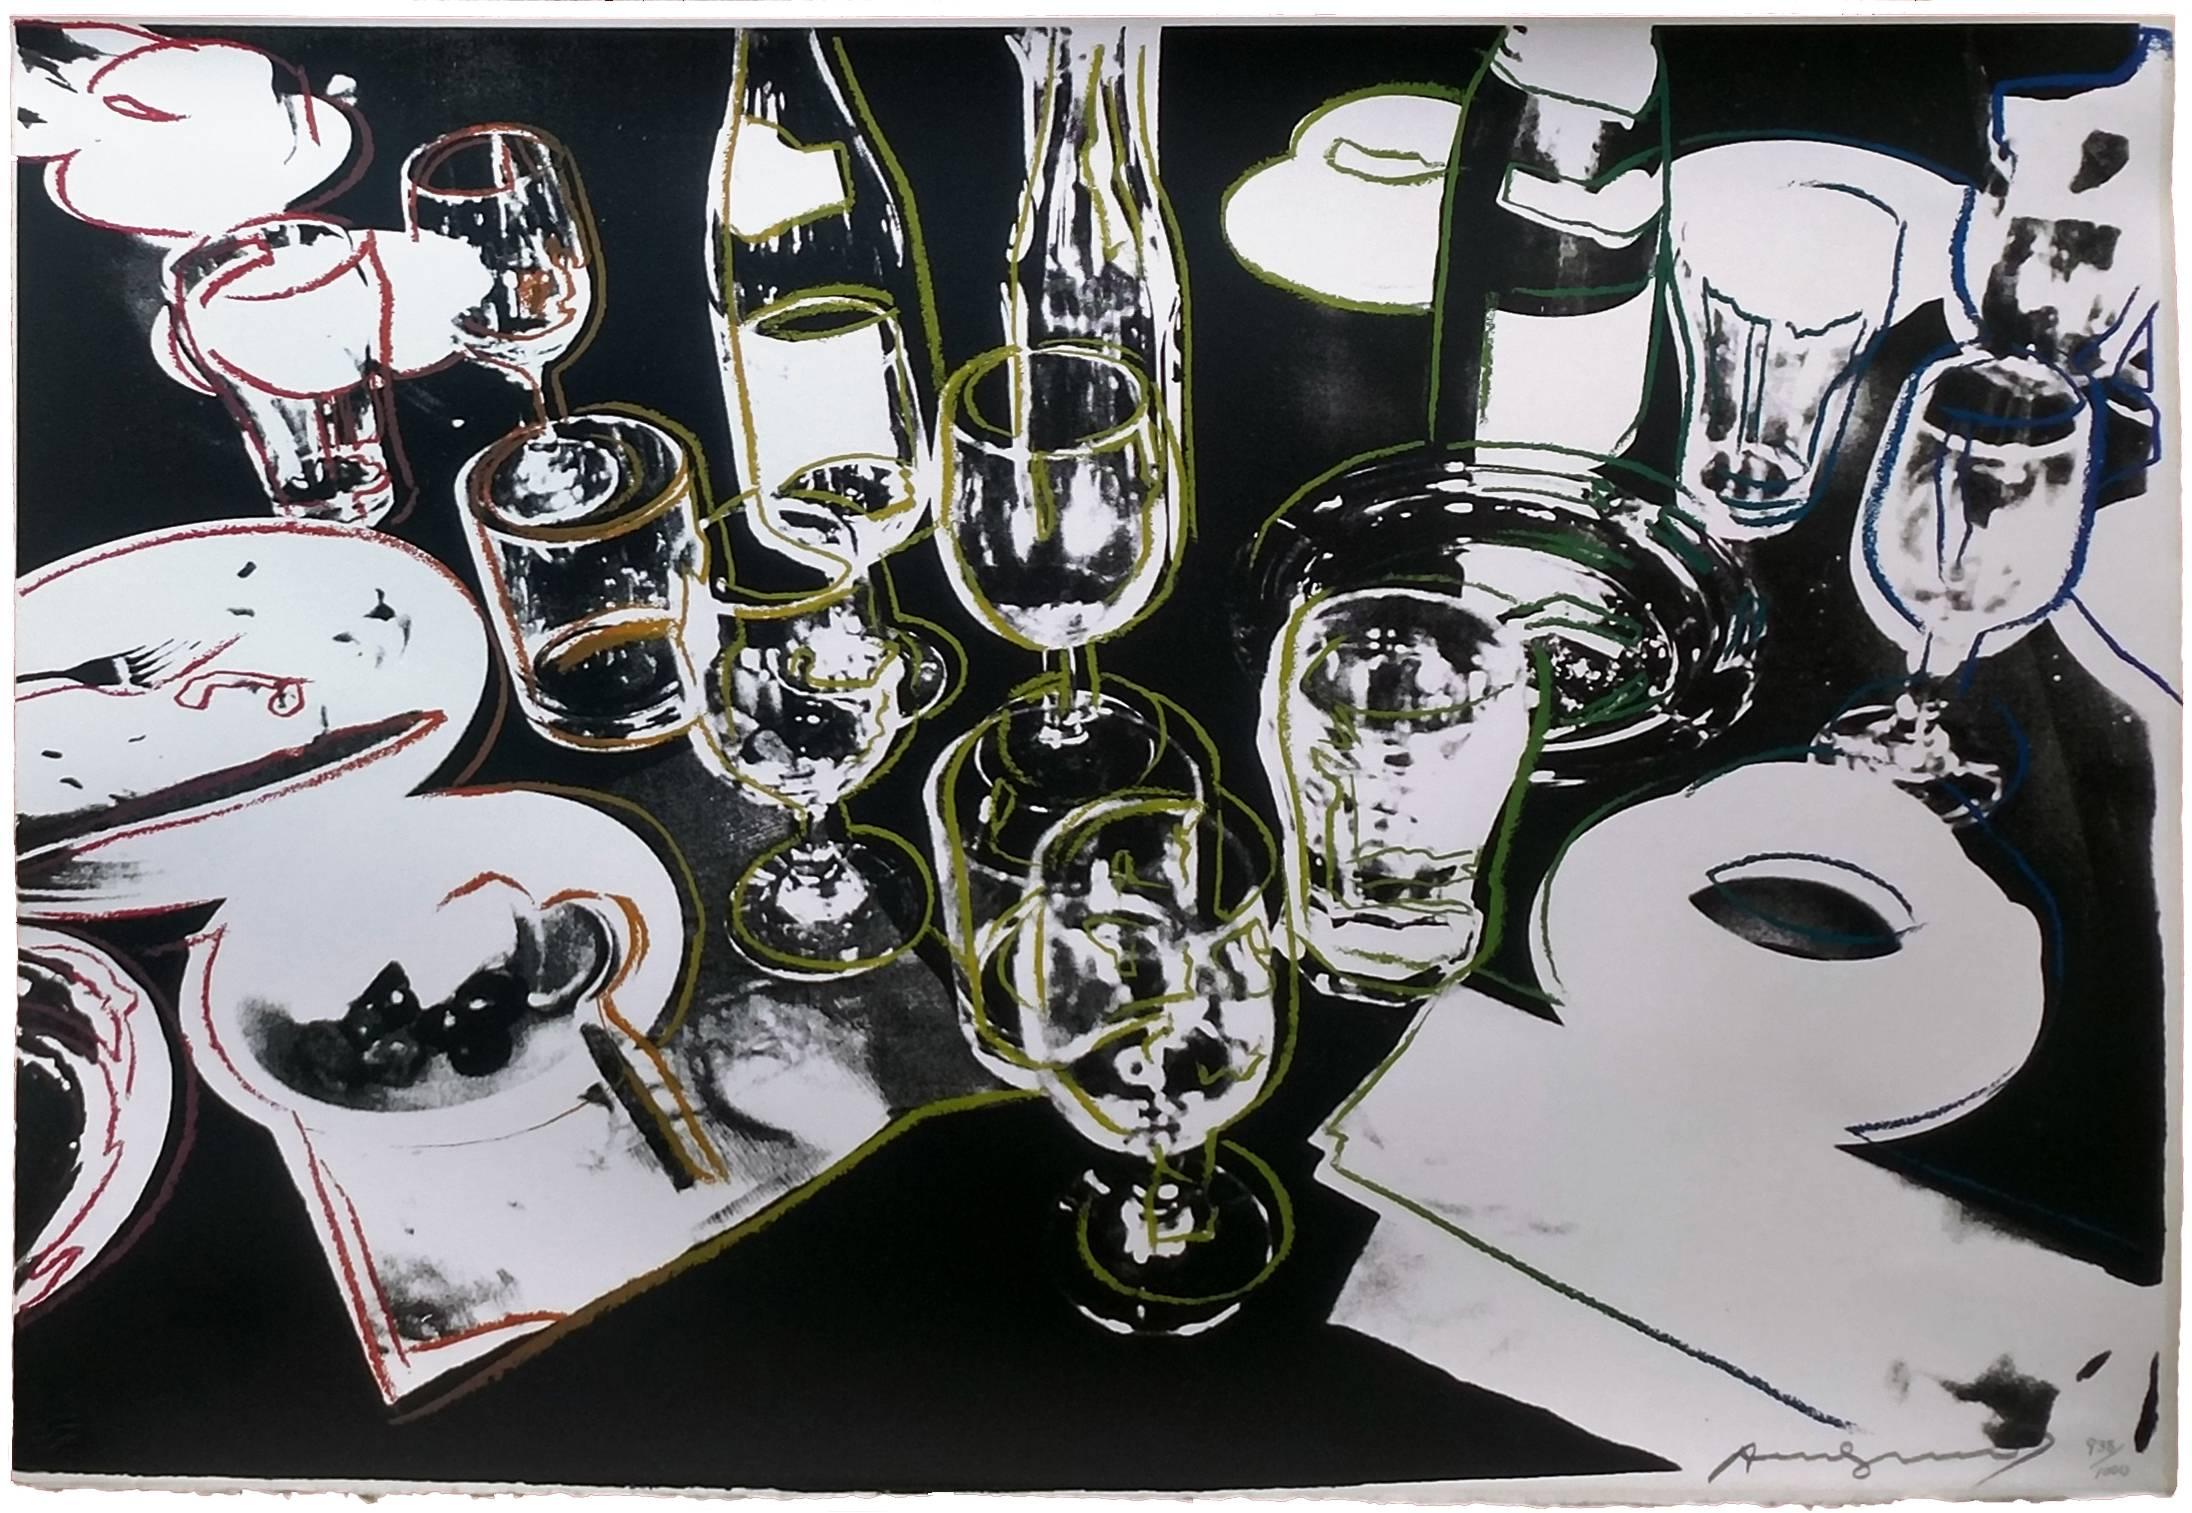 Andy Warhol Interior Print - AFTER THE PARTY FS II.183